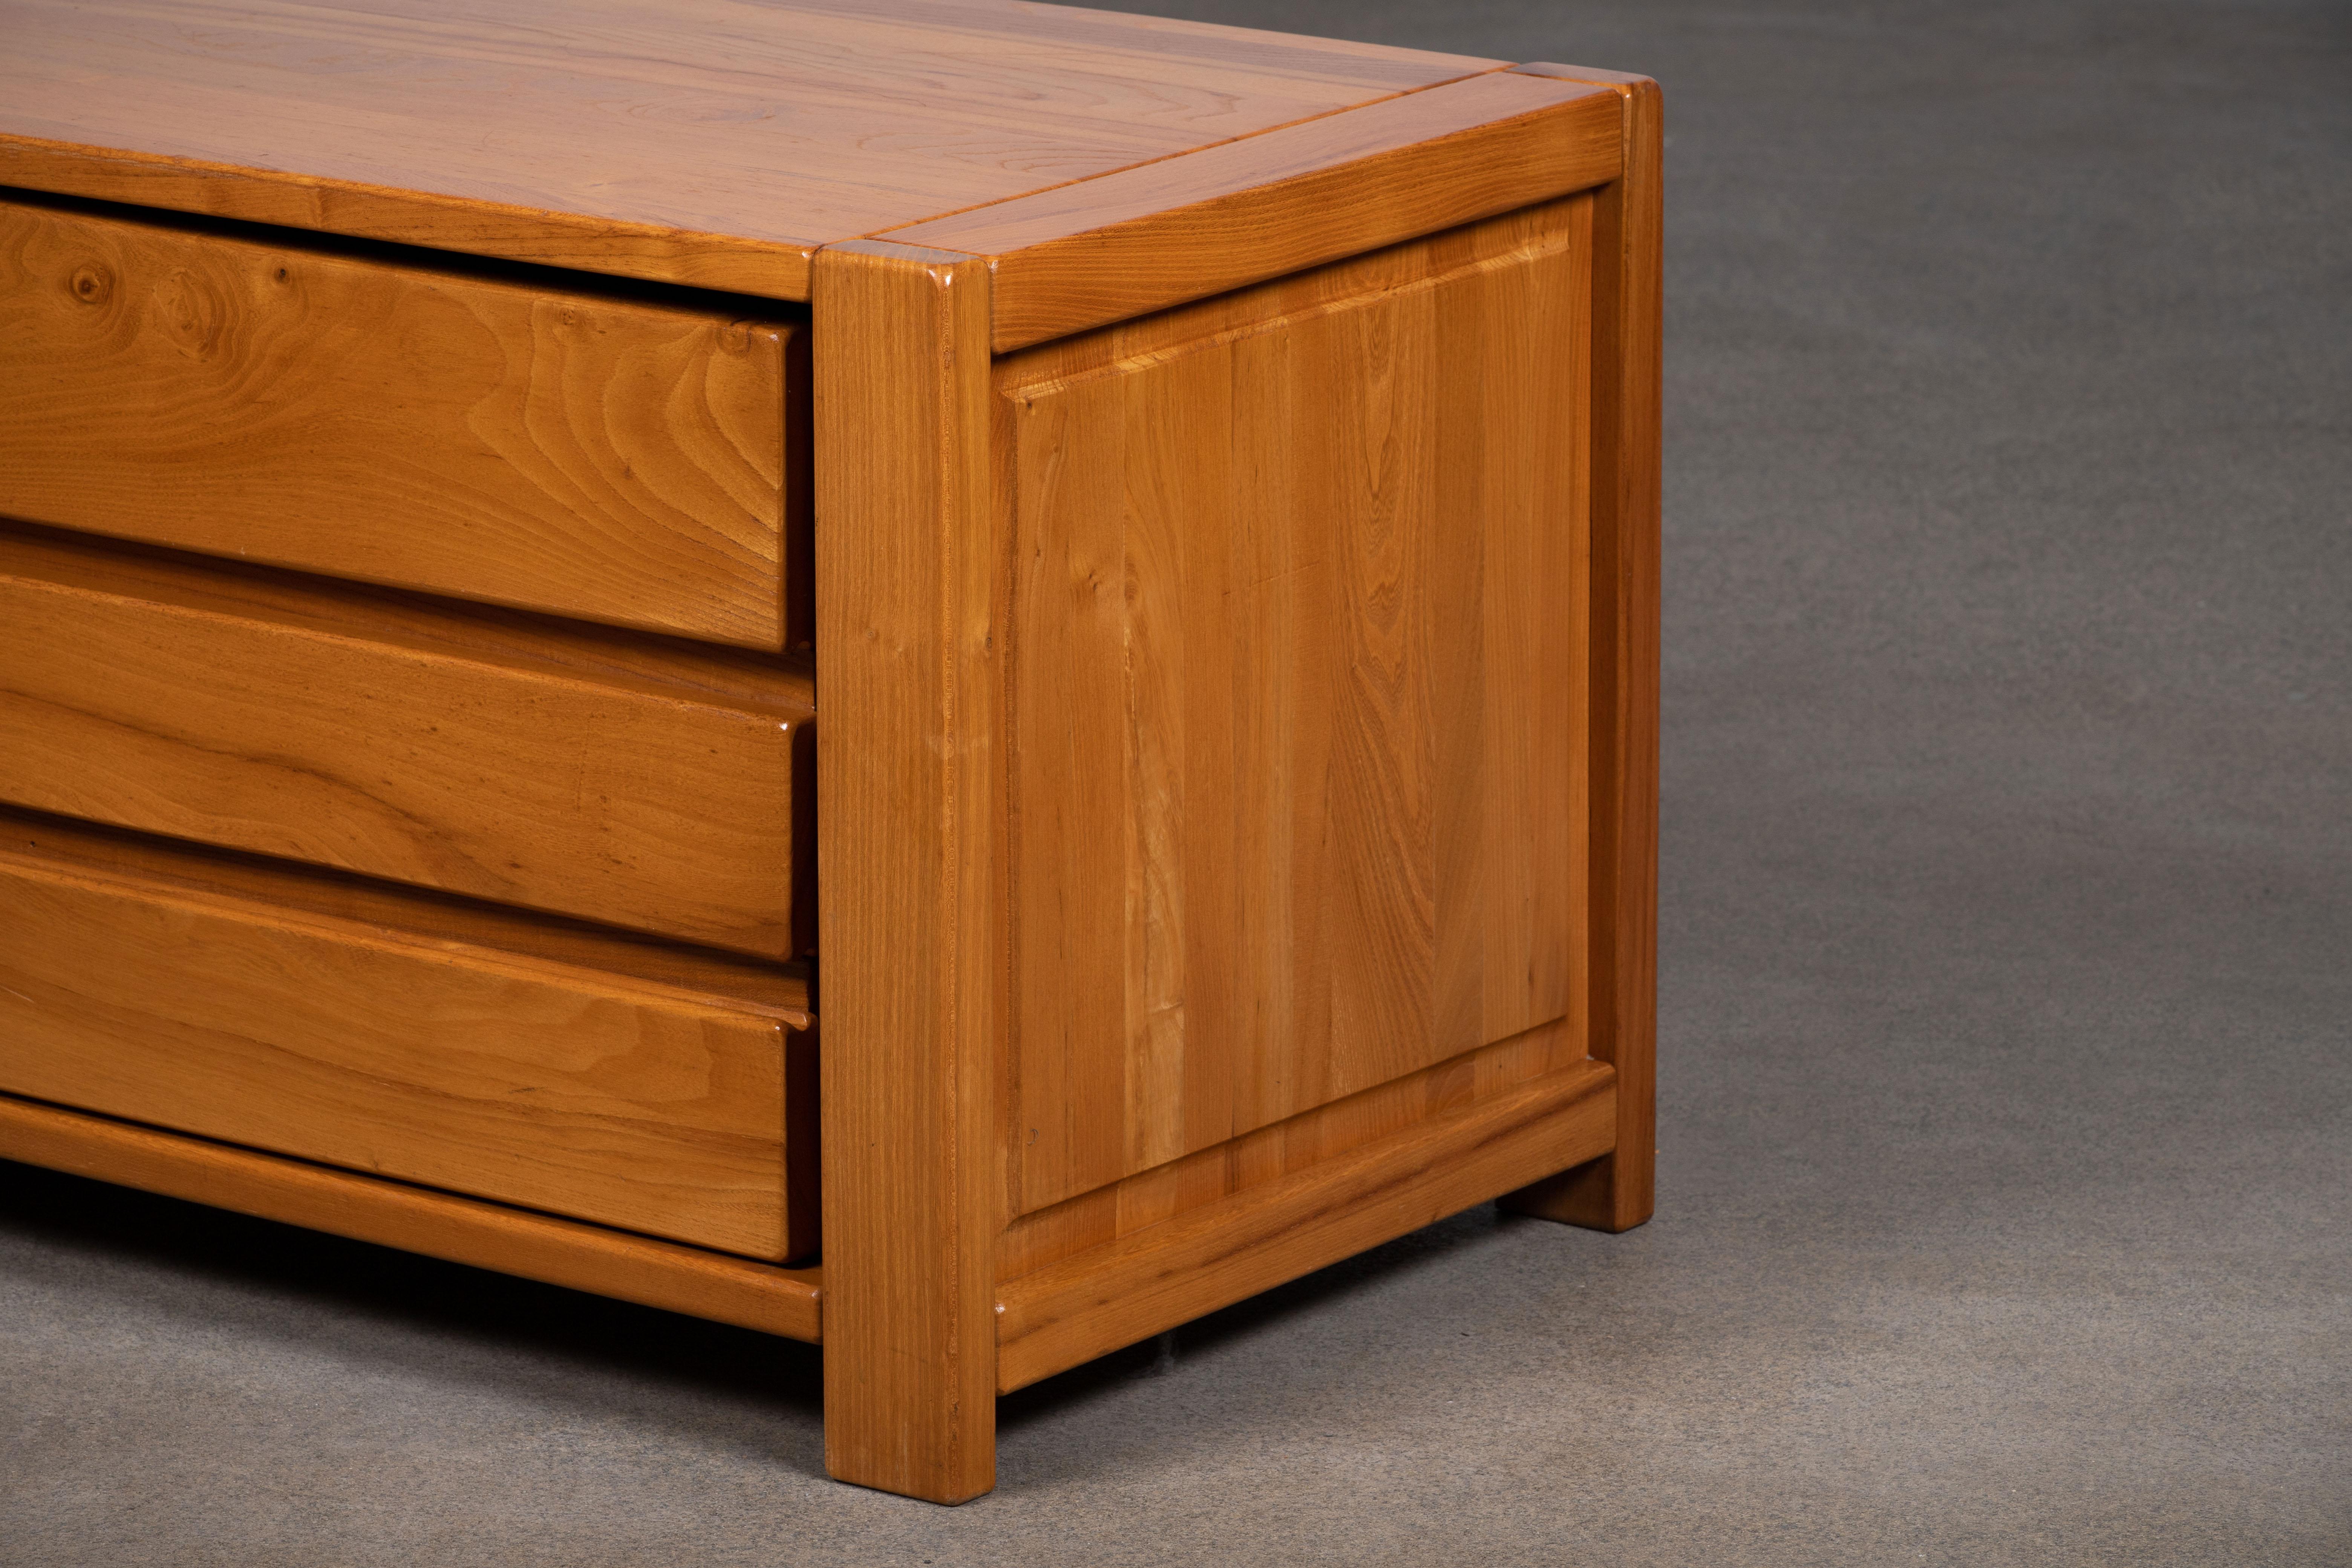 French Chapo Insp Sideboard in Solid Elm, France, 1970s For Sale